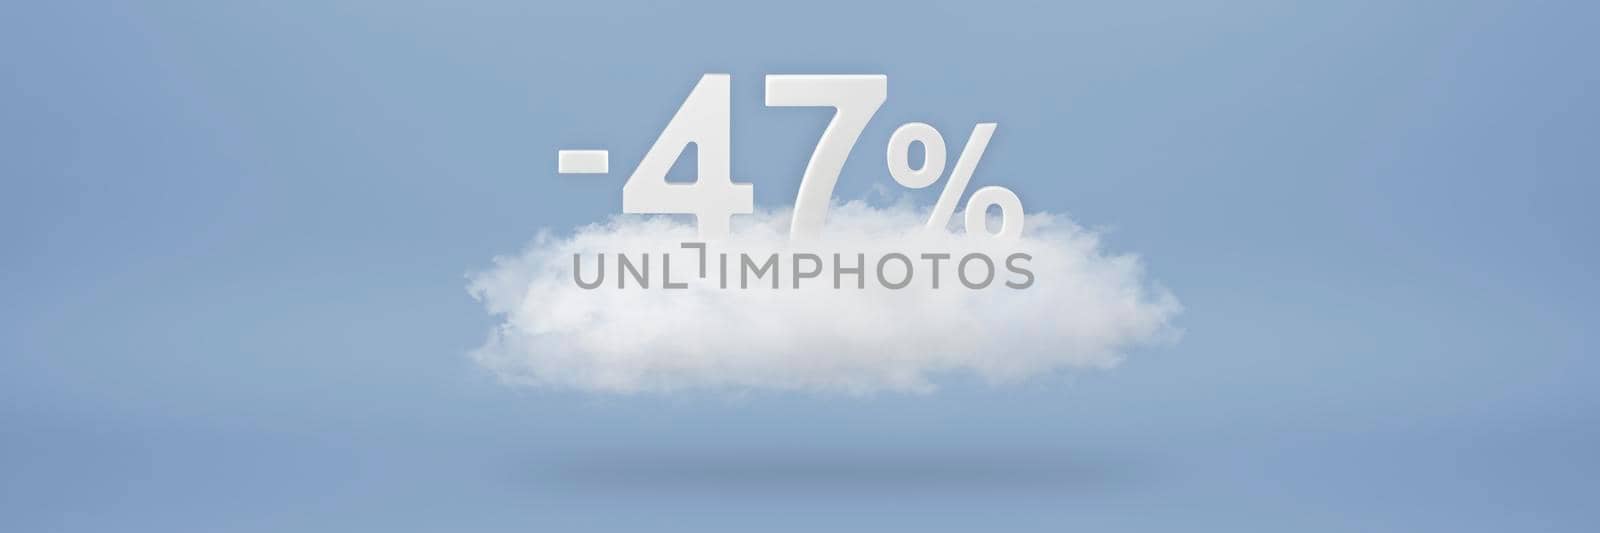 Discount 47 percent. Big discounts, sale up to forty seven percent. 3D numbers float on a cloud on a blue background. Copy space. Advertising banner and poster to be inserted into the project.